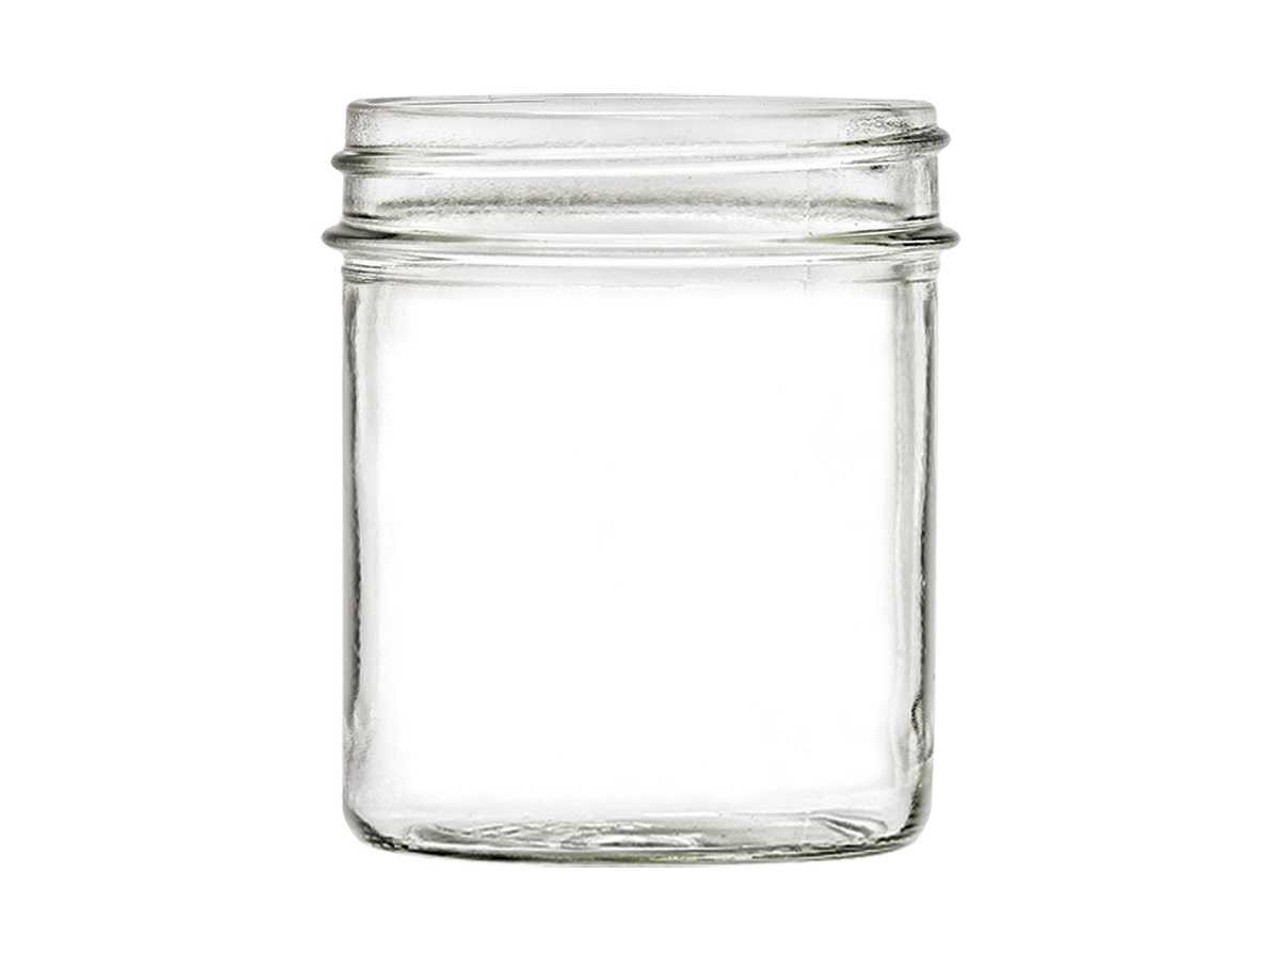 https://cdn11.bigcommerce.com/s-1ybtx/images/stencil/1280x1280/products/1174/6474/8-oz-Straight-Sided-Mason-Glass-Jar-with-your-choice-of-lid-Made-in-USA_3736__74612.1699988895.jpg?c=2?imbypass=on